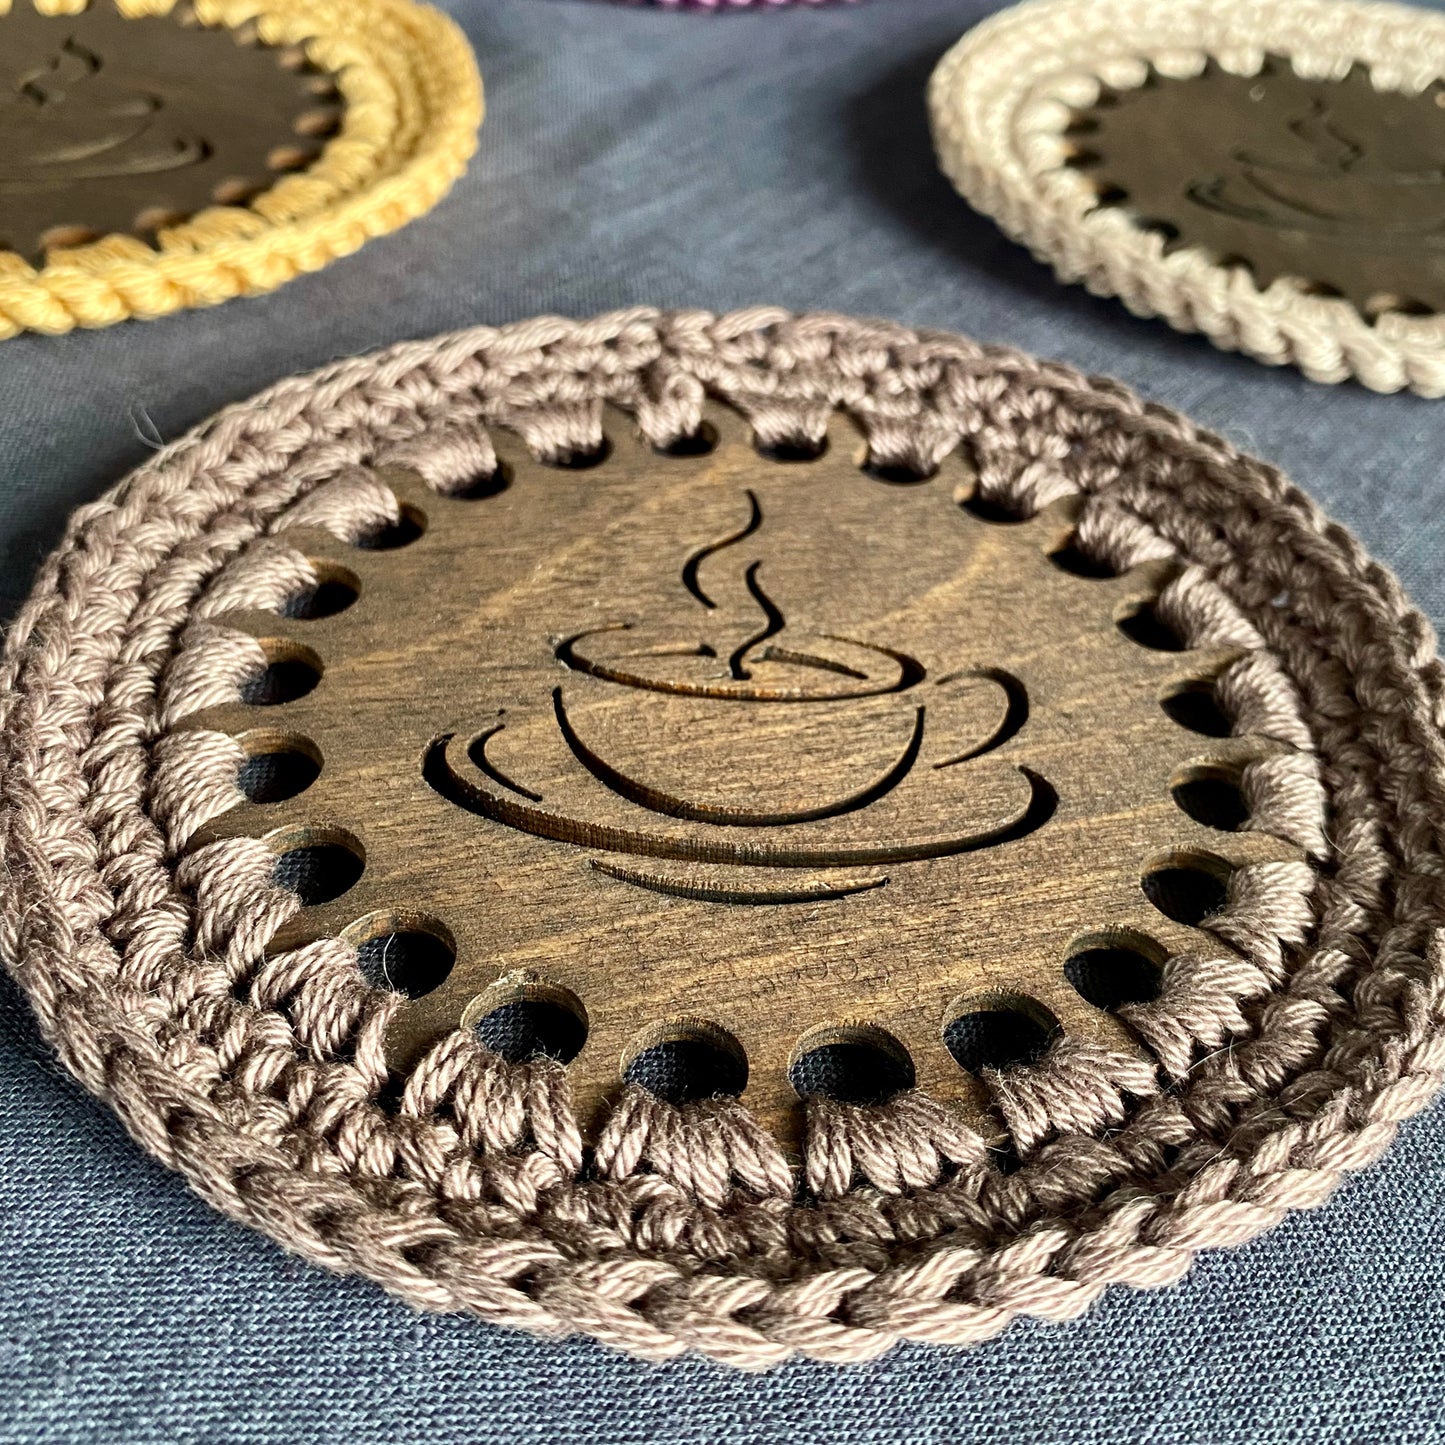 Coasters for Coffee or Tea Lovers